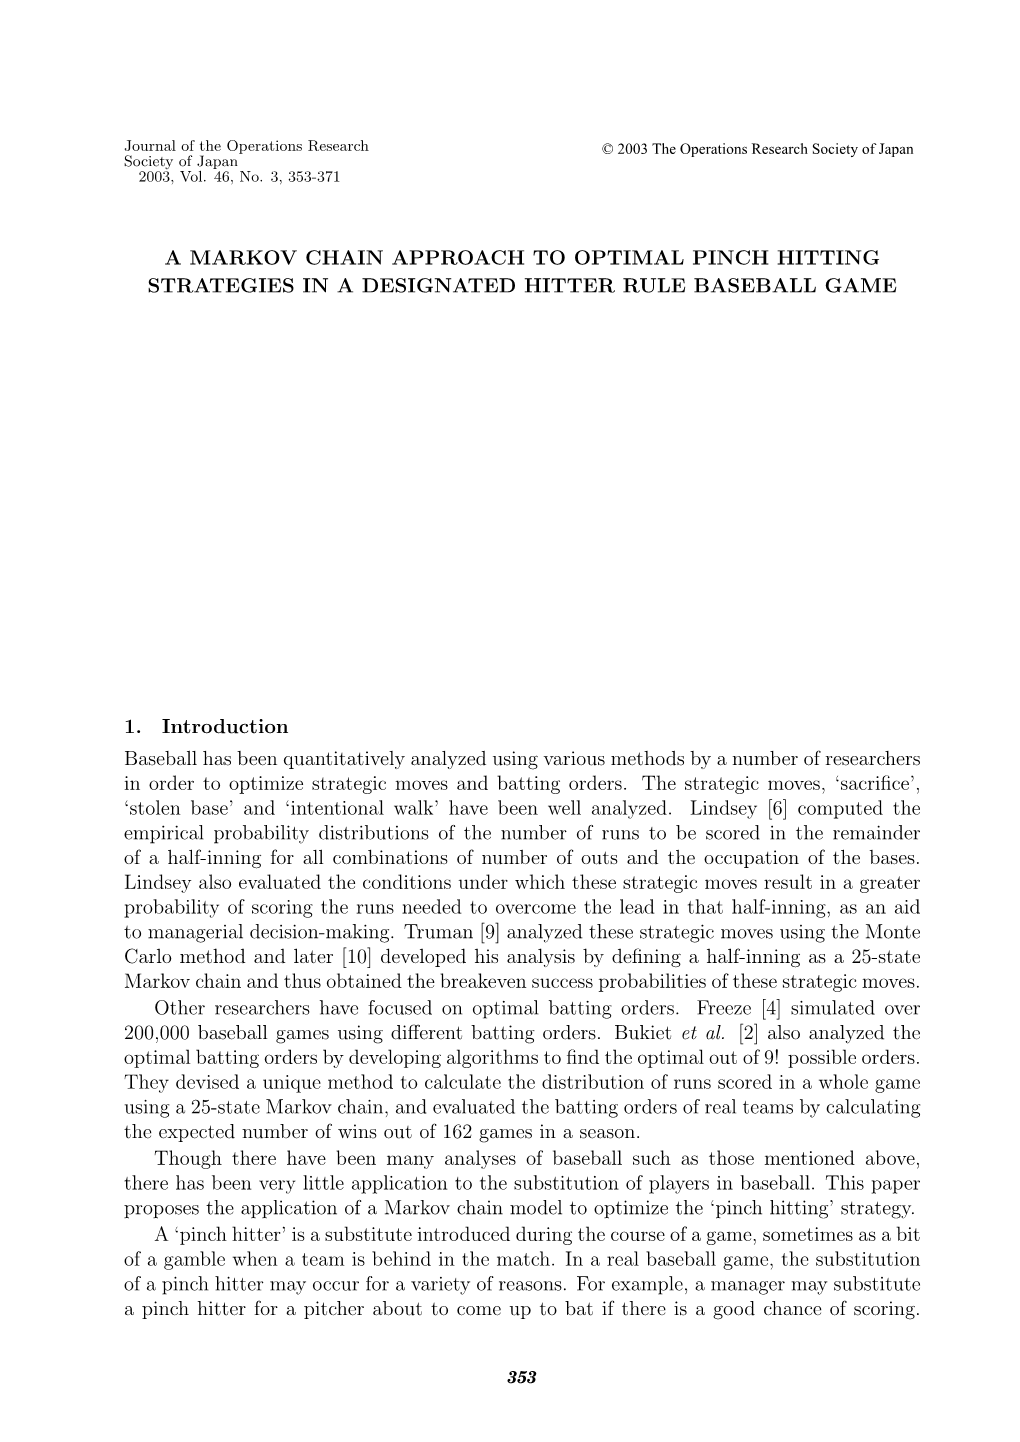 A Markov Chain Approach to Optimal Pinch Hitting Strategies in a Designated Hitter Rule Baseball Game